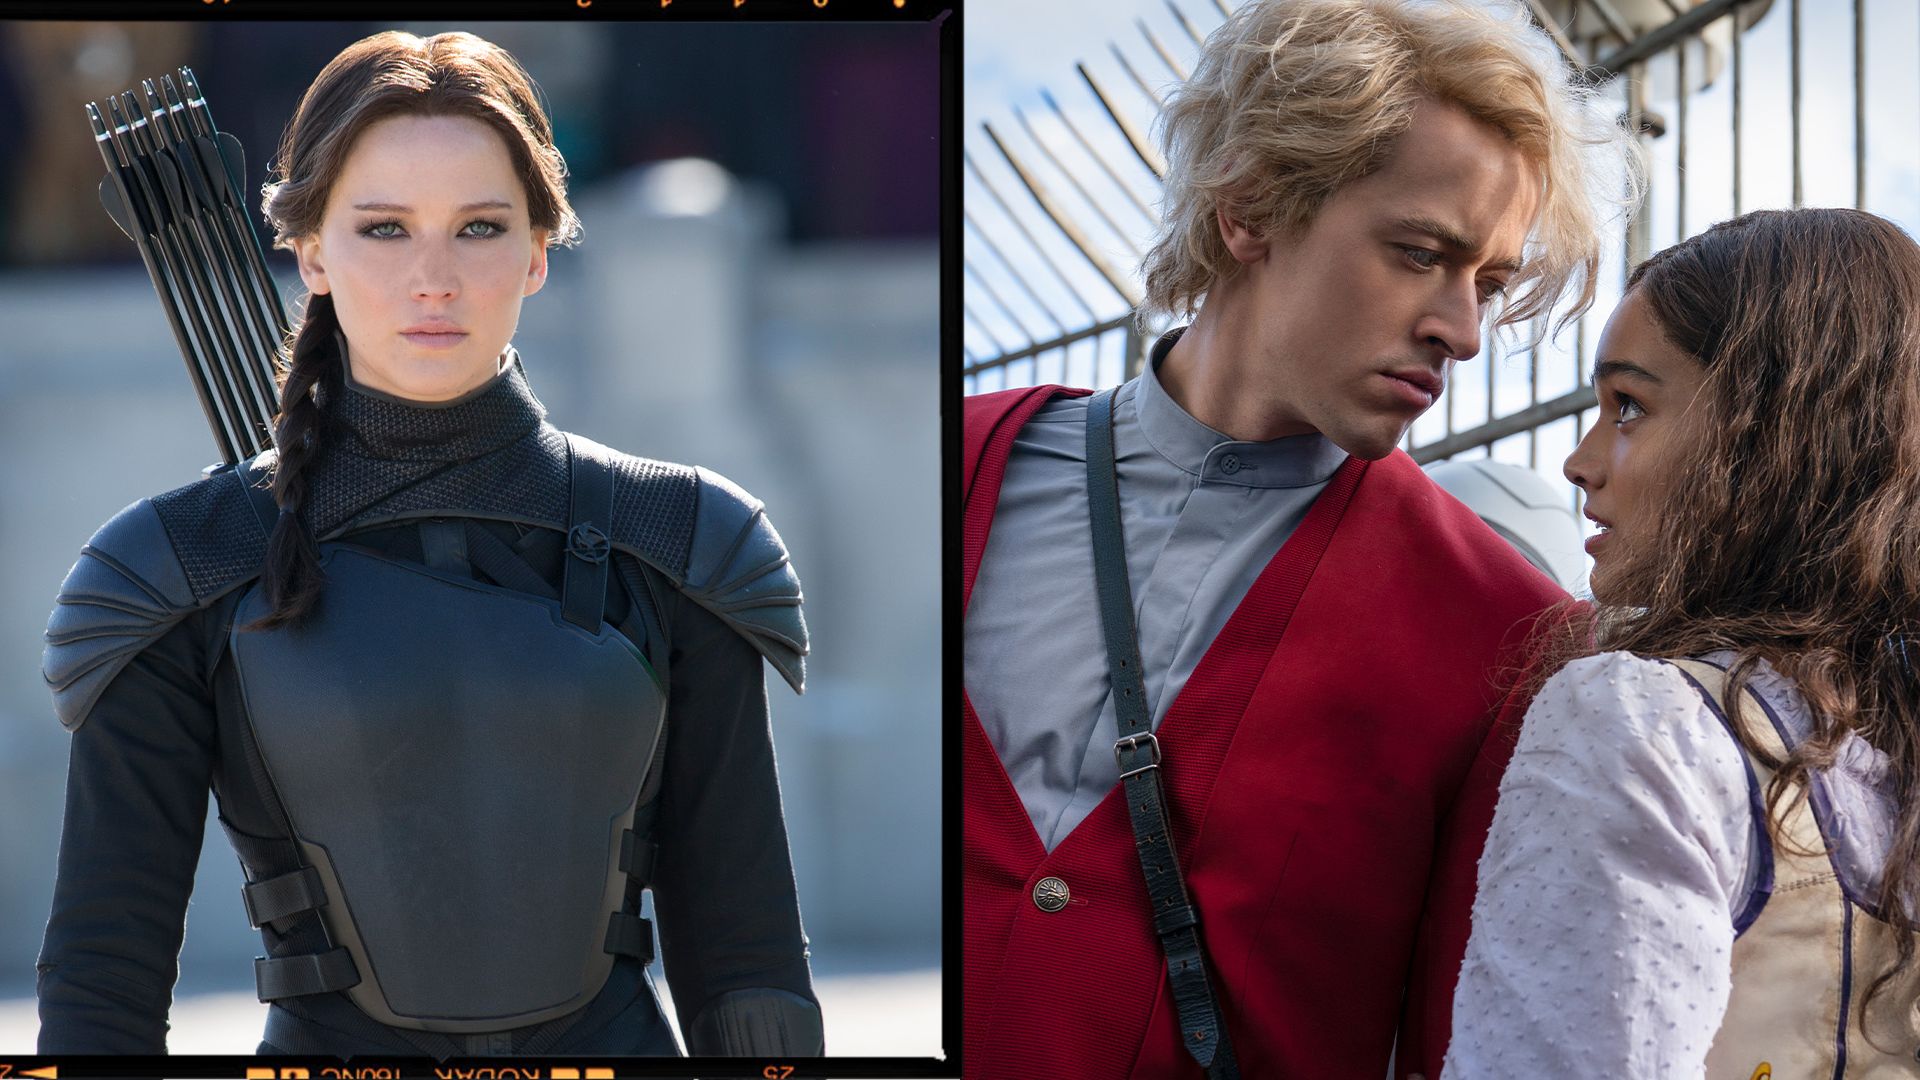 Why Catching Fire is still the best Hunger Games movie ever